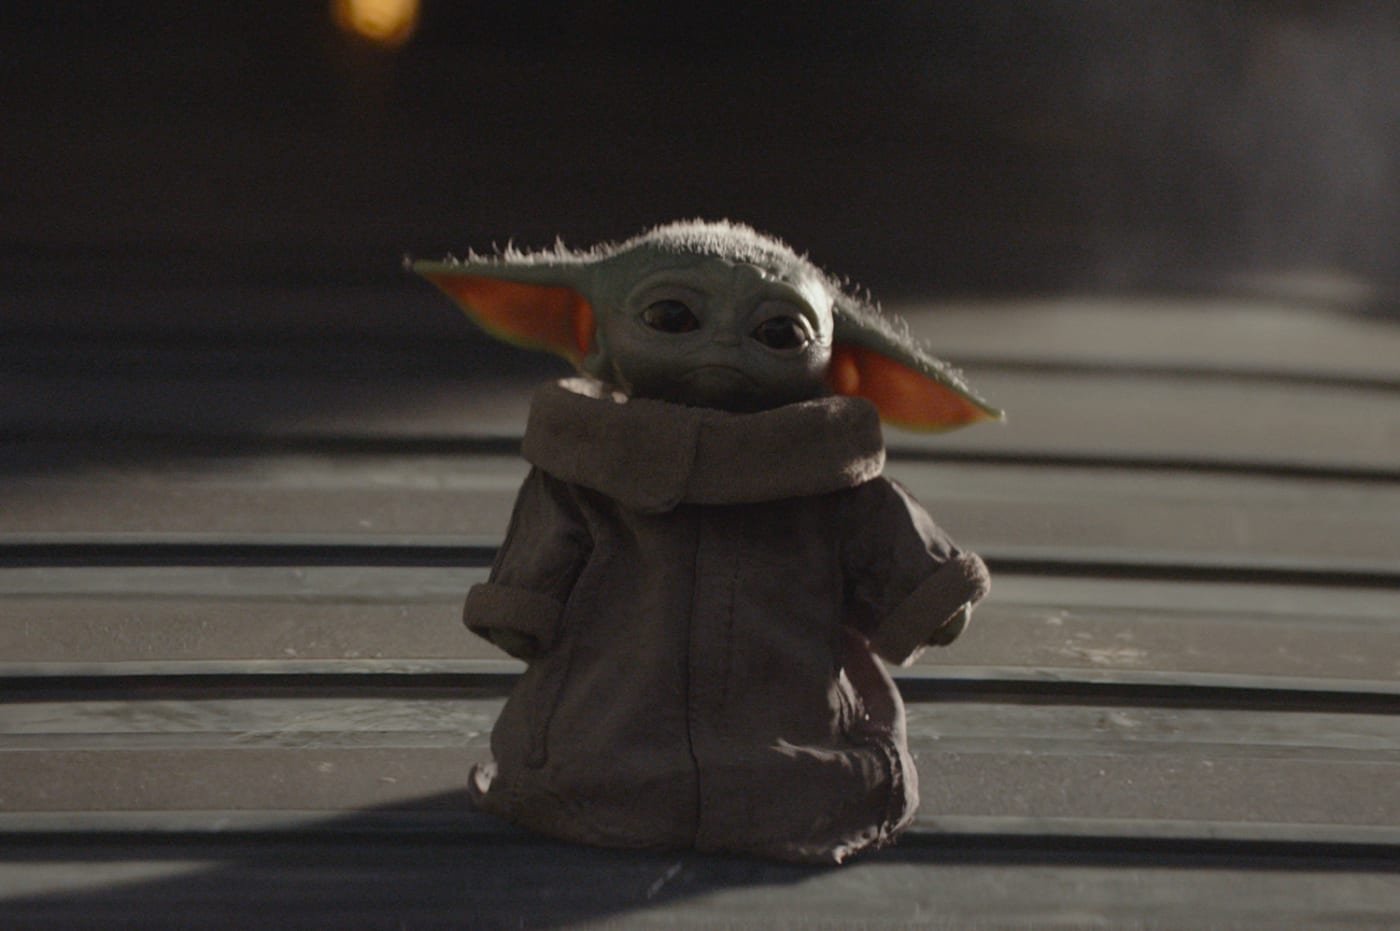 Baby Yoda, aka The Child from the Star Wars franchise's Disney+ series 'The Mandalorian'